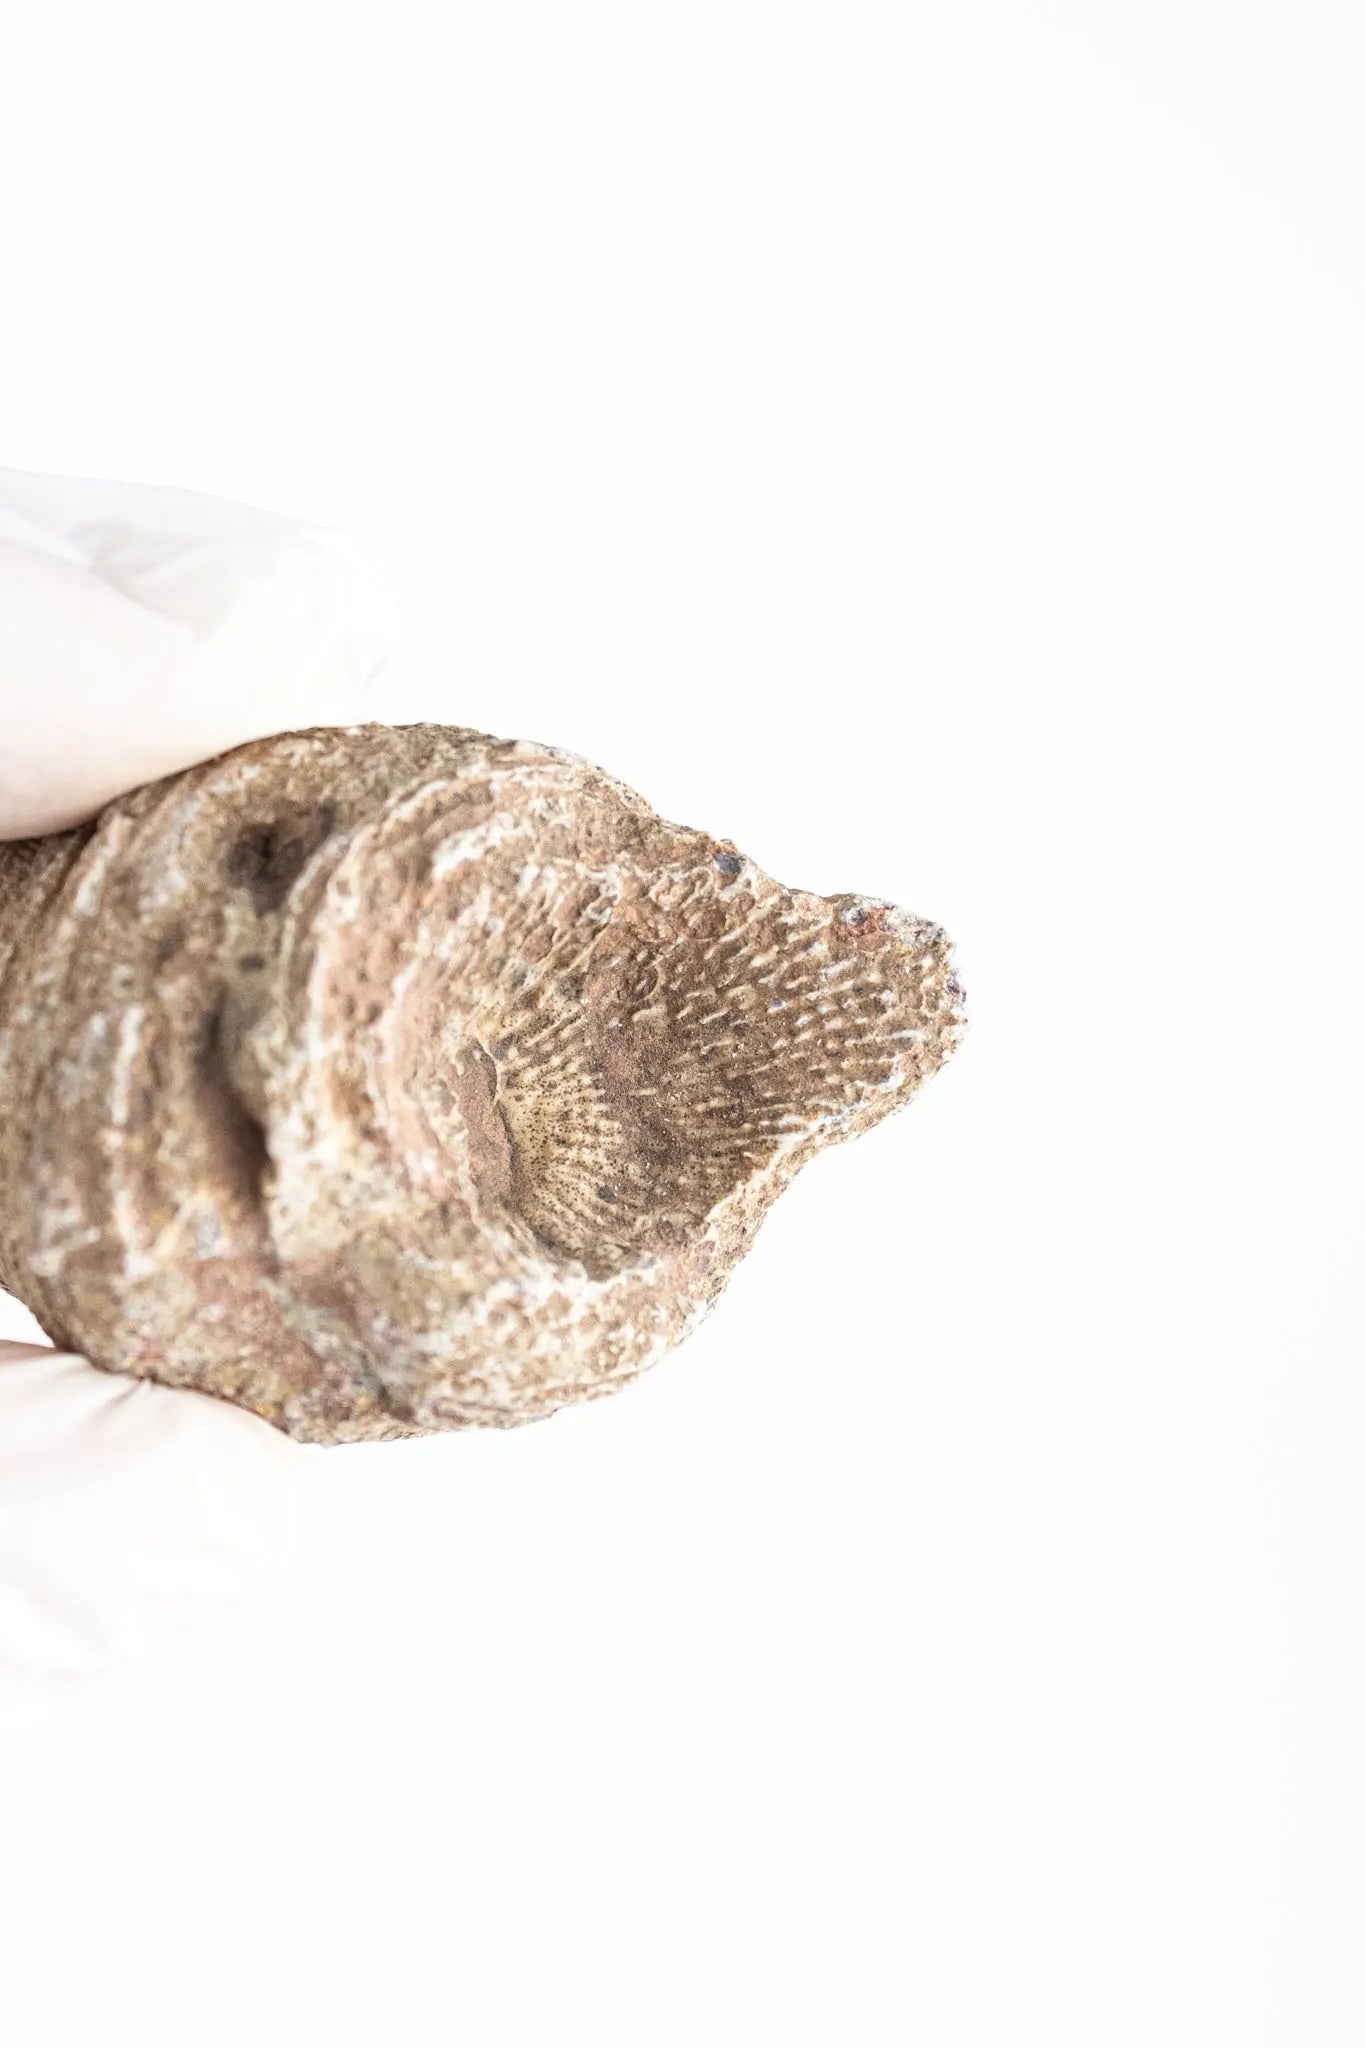 Horn Coral Fossil